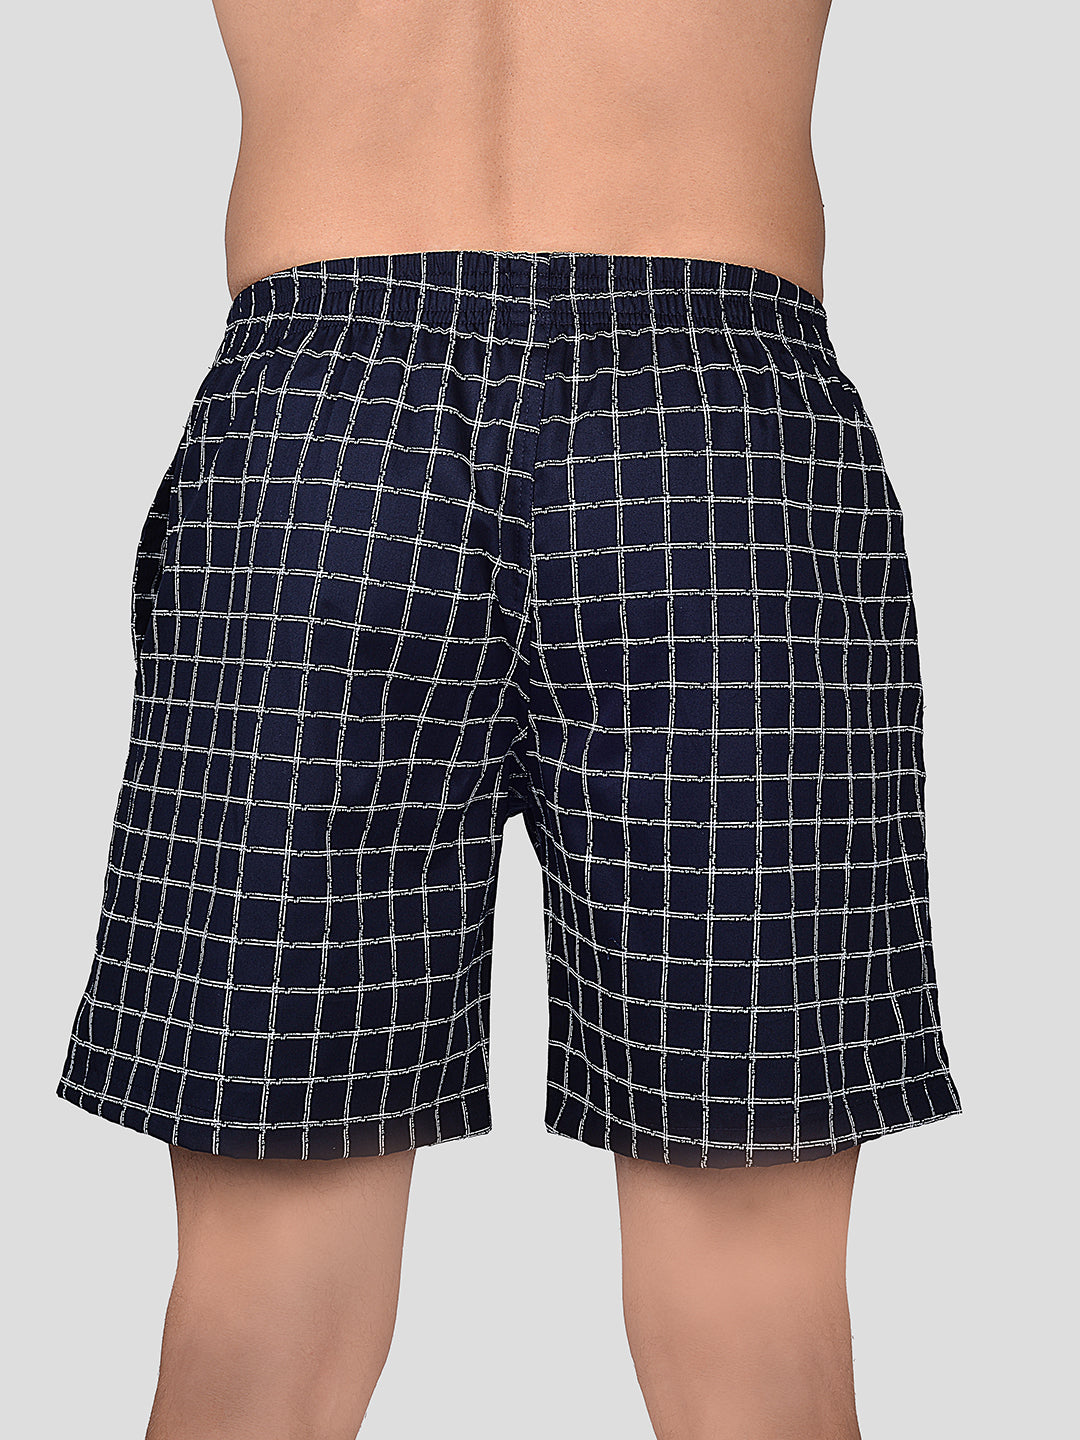 Frenchie Men's Boxer Printed Shorts NC (Assorted)